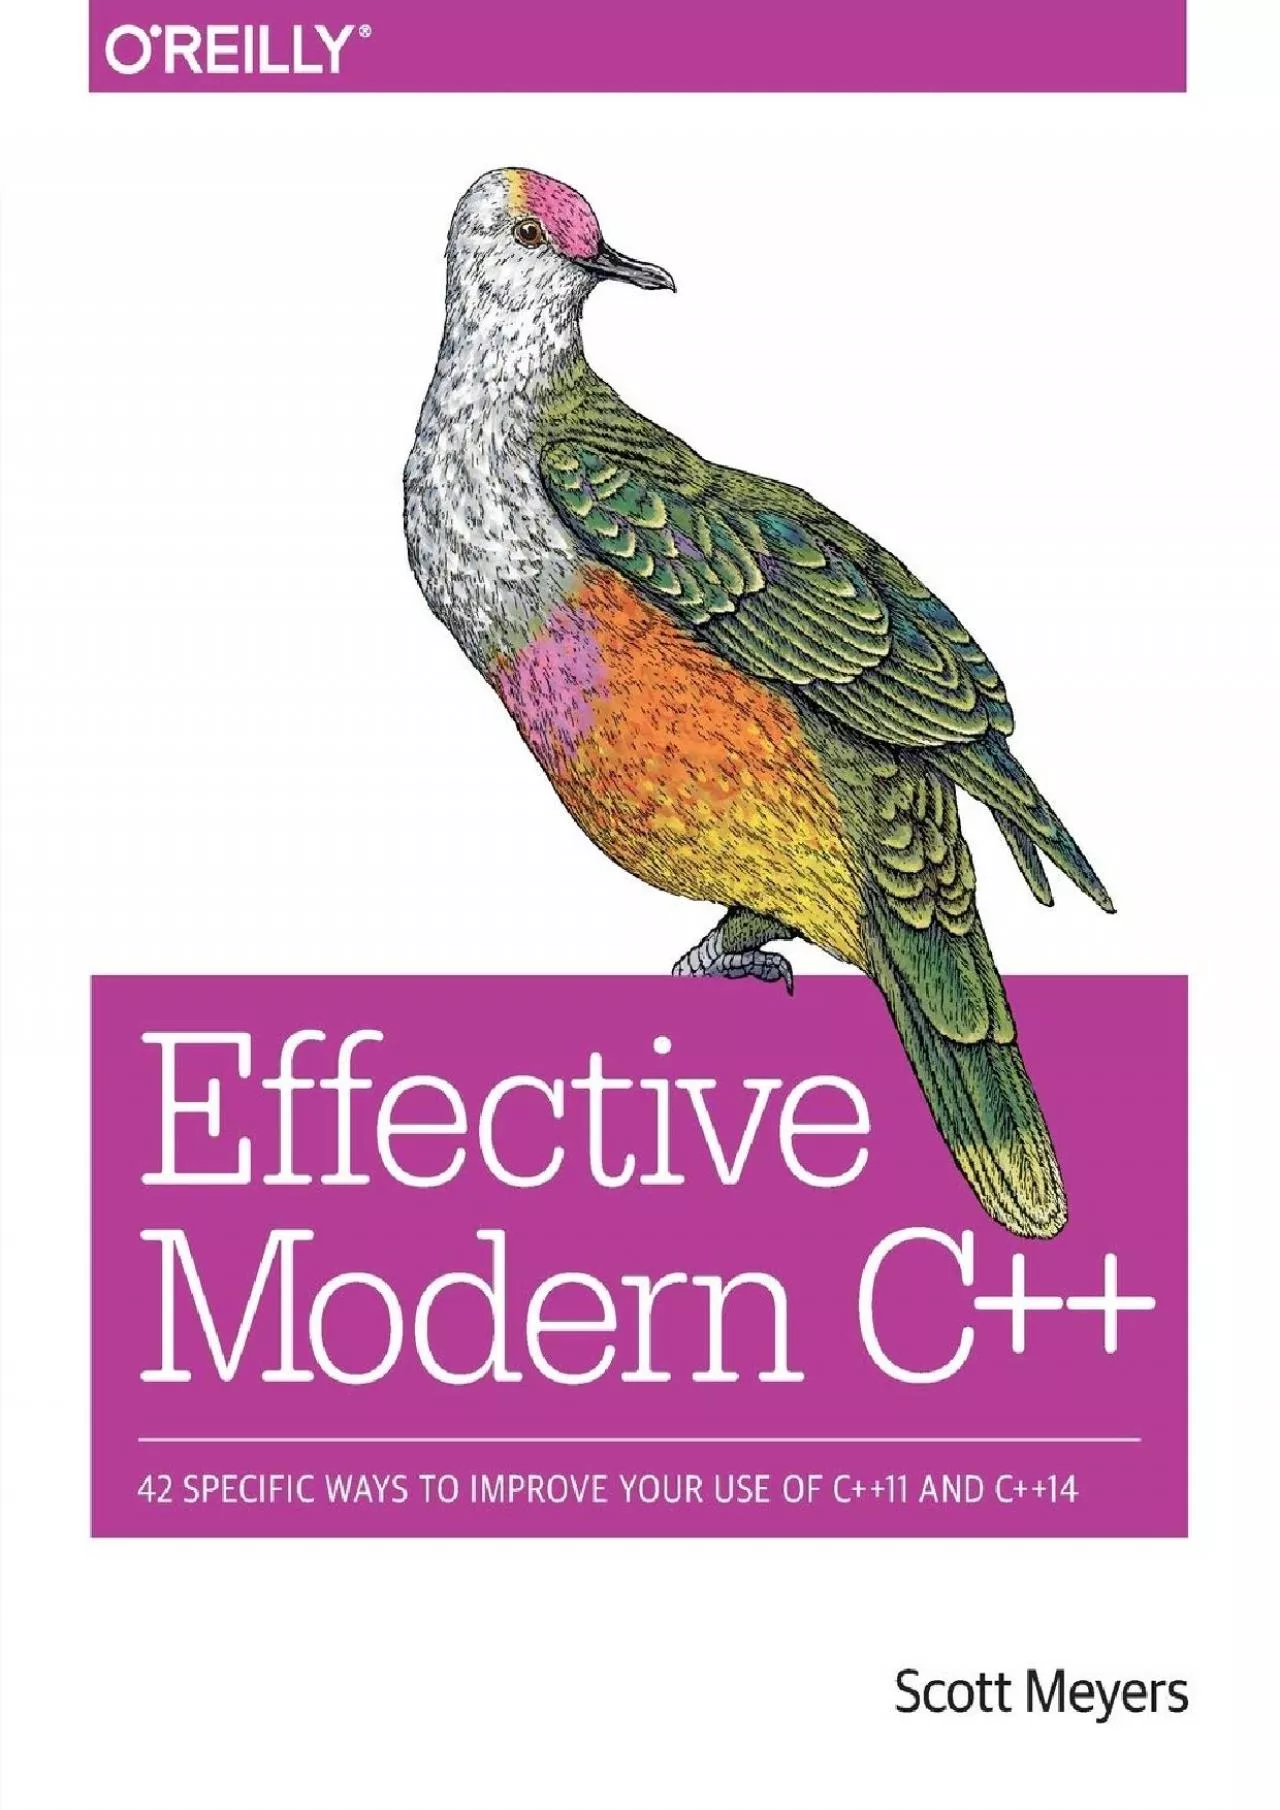 [PDF]-Effective Modern C++: 42 Specific Ways to Improve Your Use of C++11 and C++14